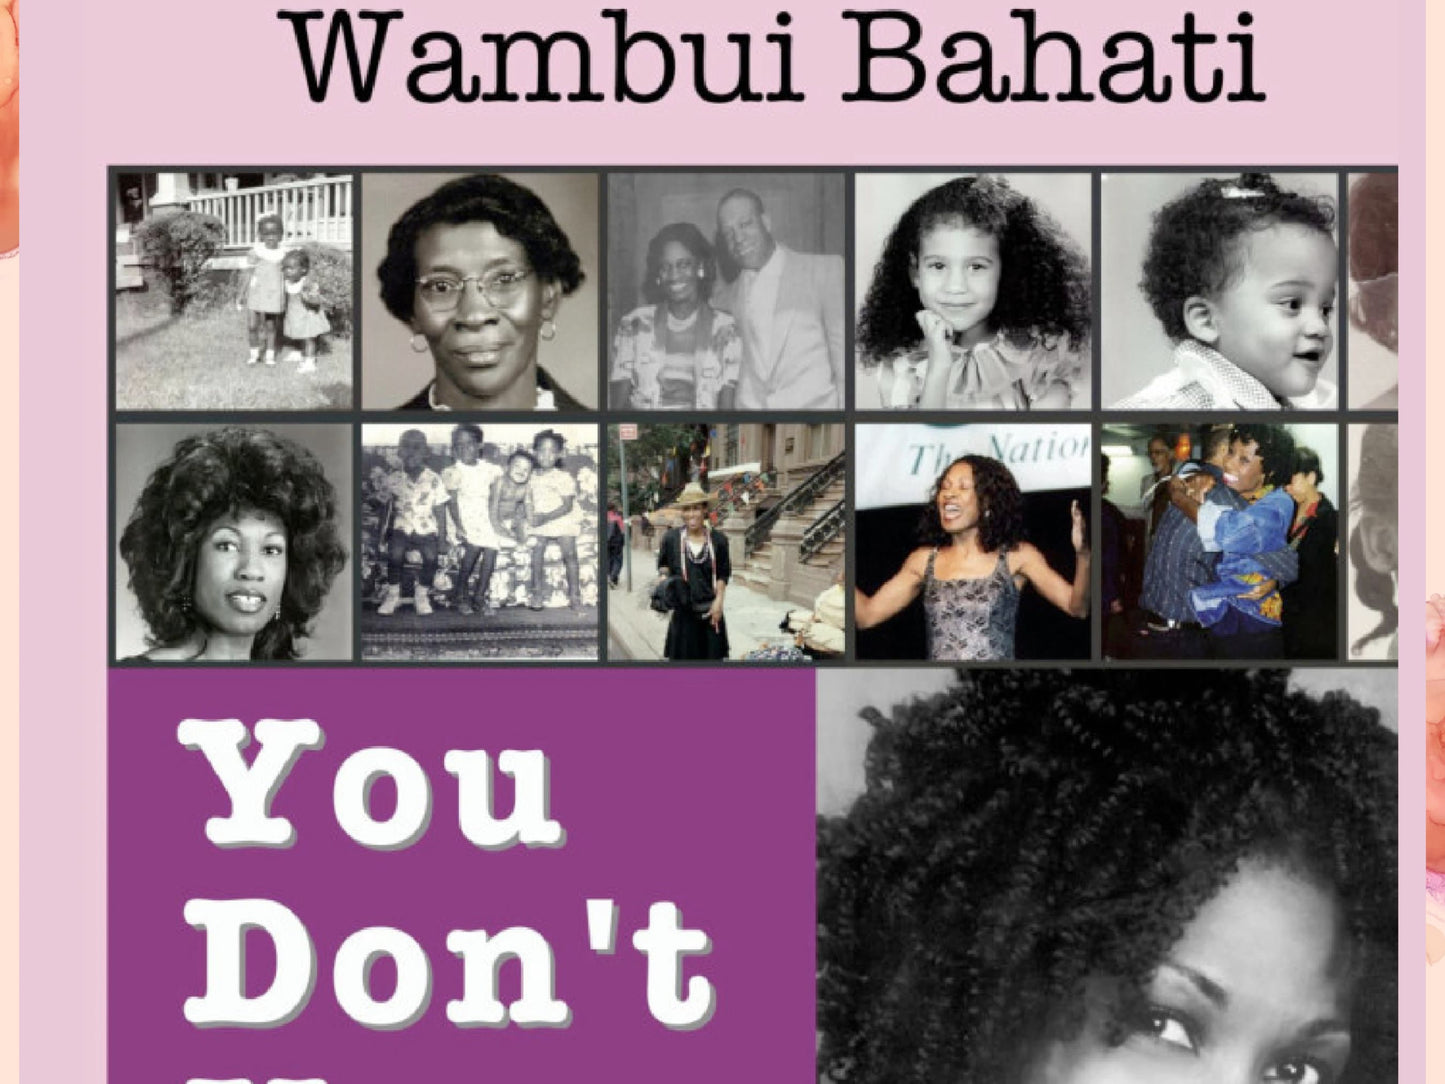 You Don't Know Crazy - My Life Before, During, After, Above, and Beyond Mental Illness - by Wambui Bahati